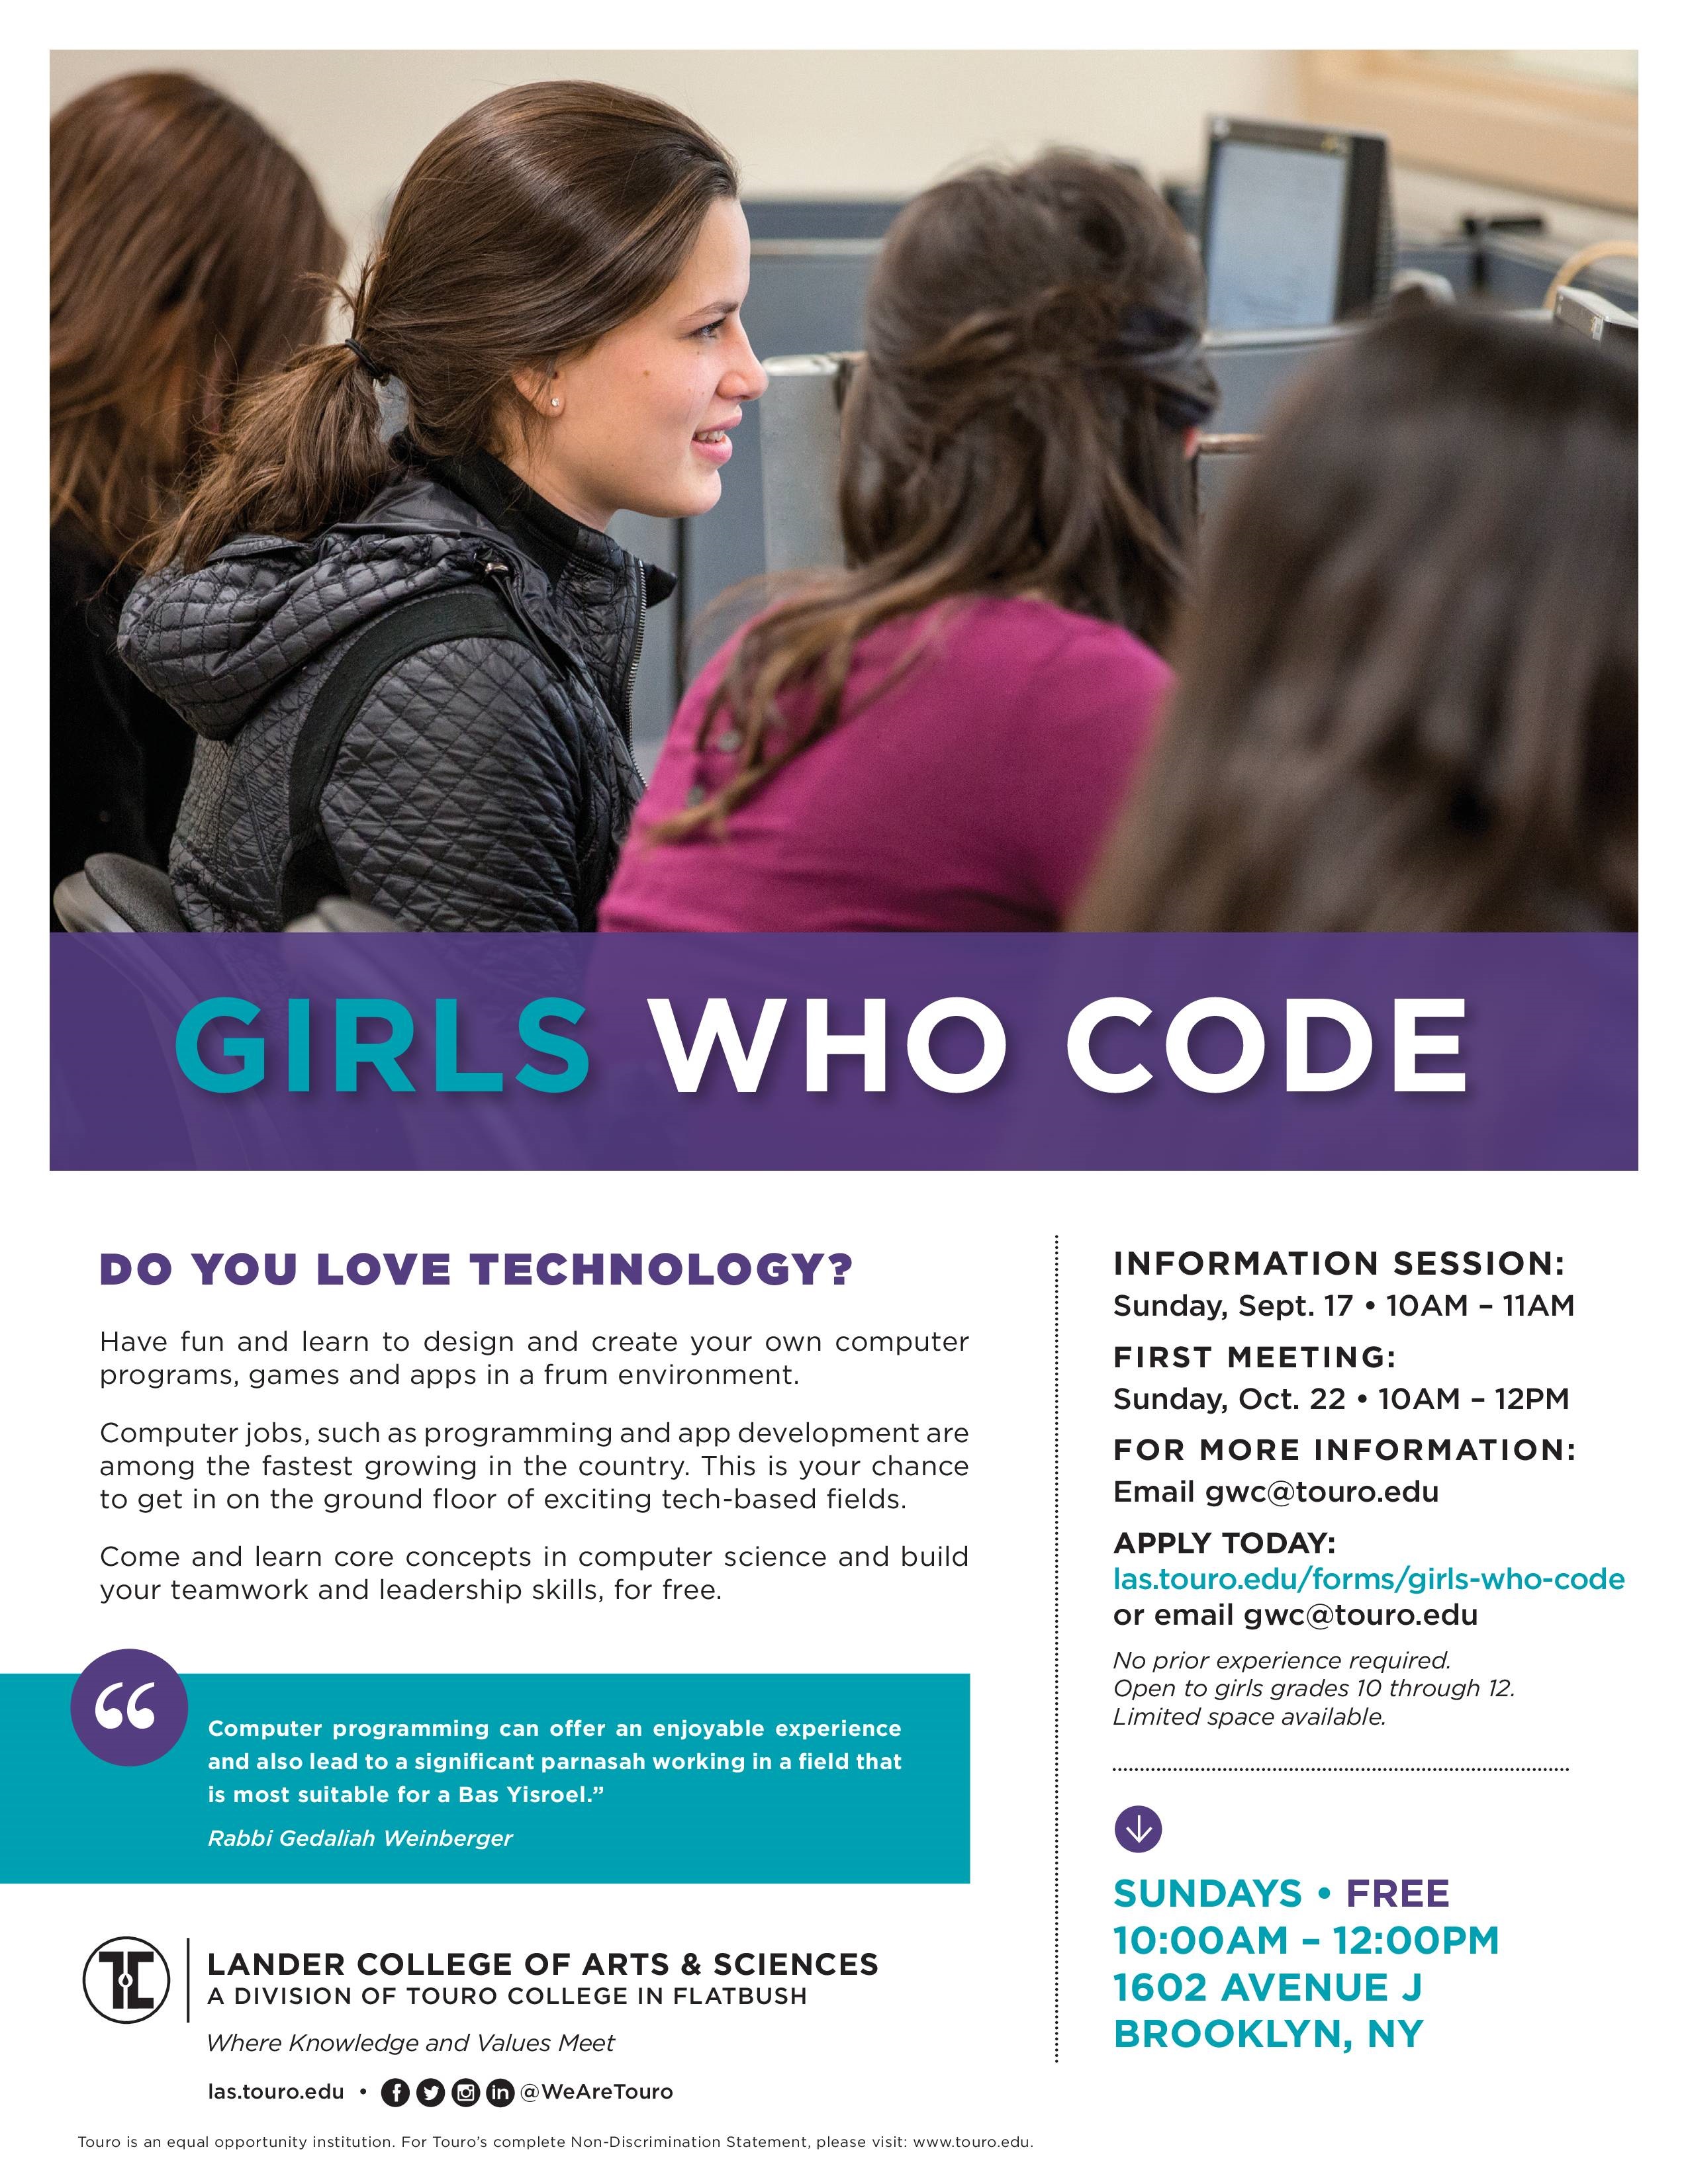 A great opportunity for high school juniors and seniors interested in learning to code. 